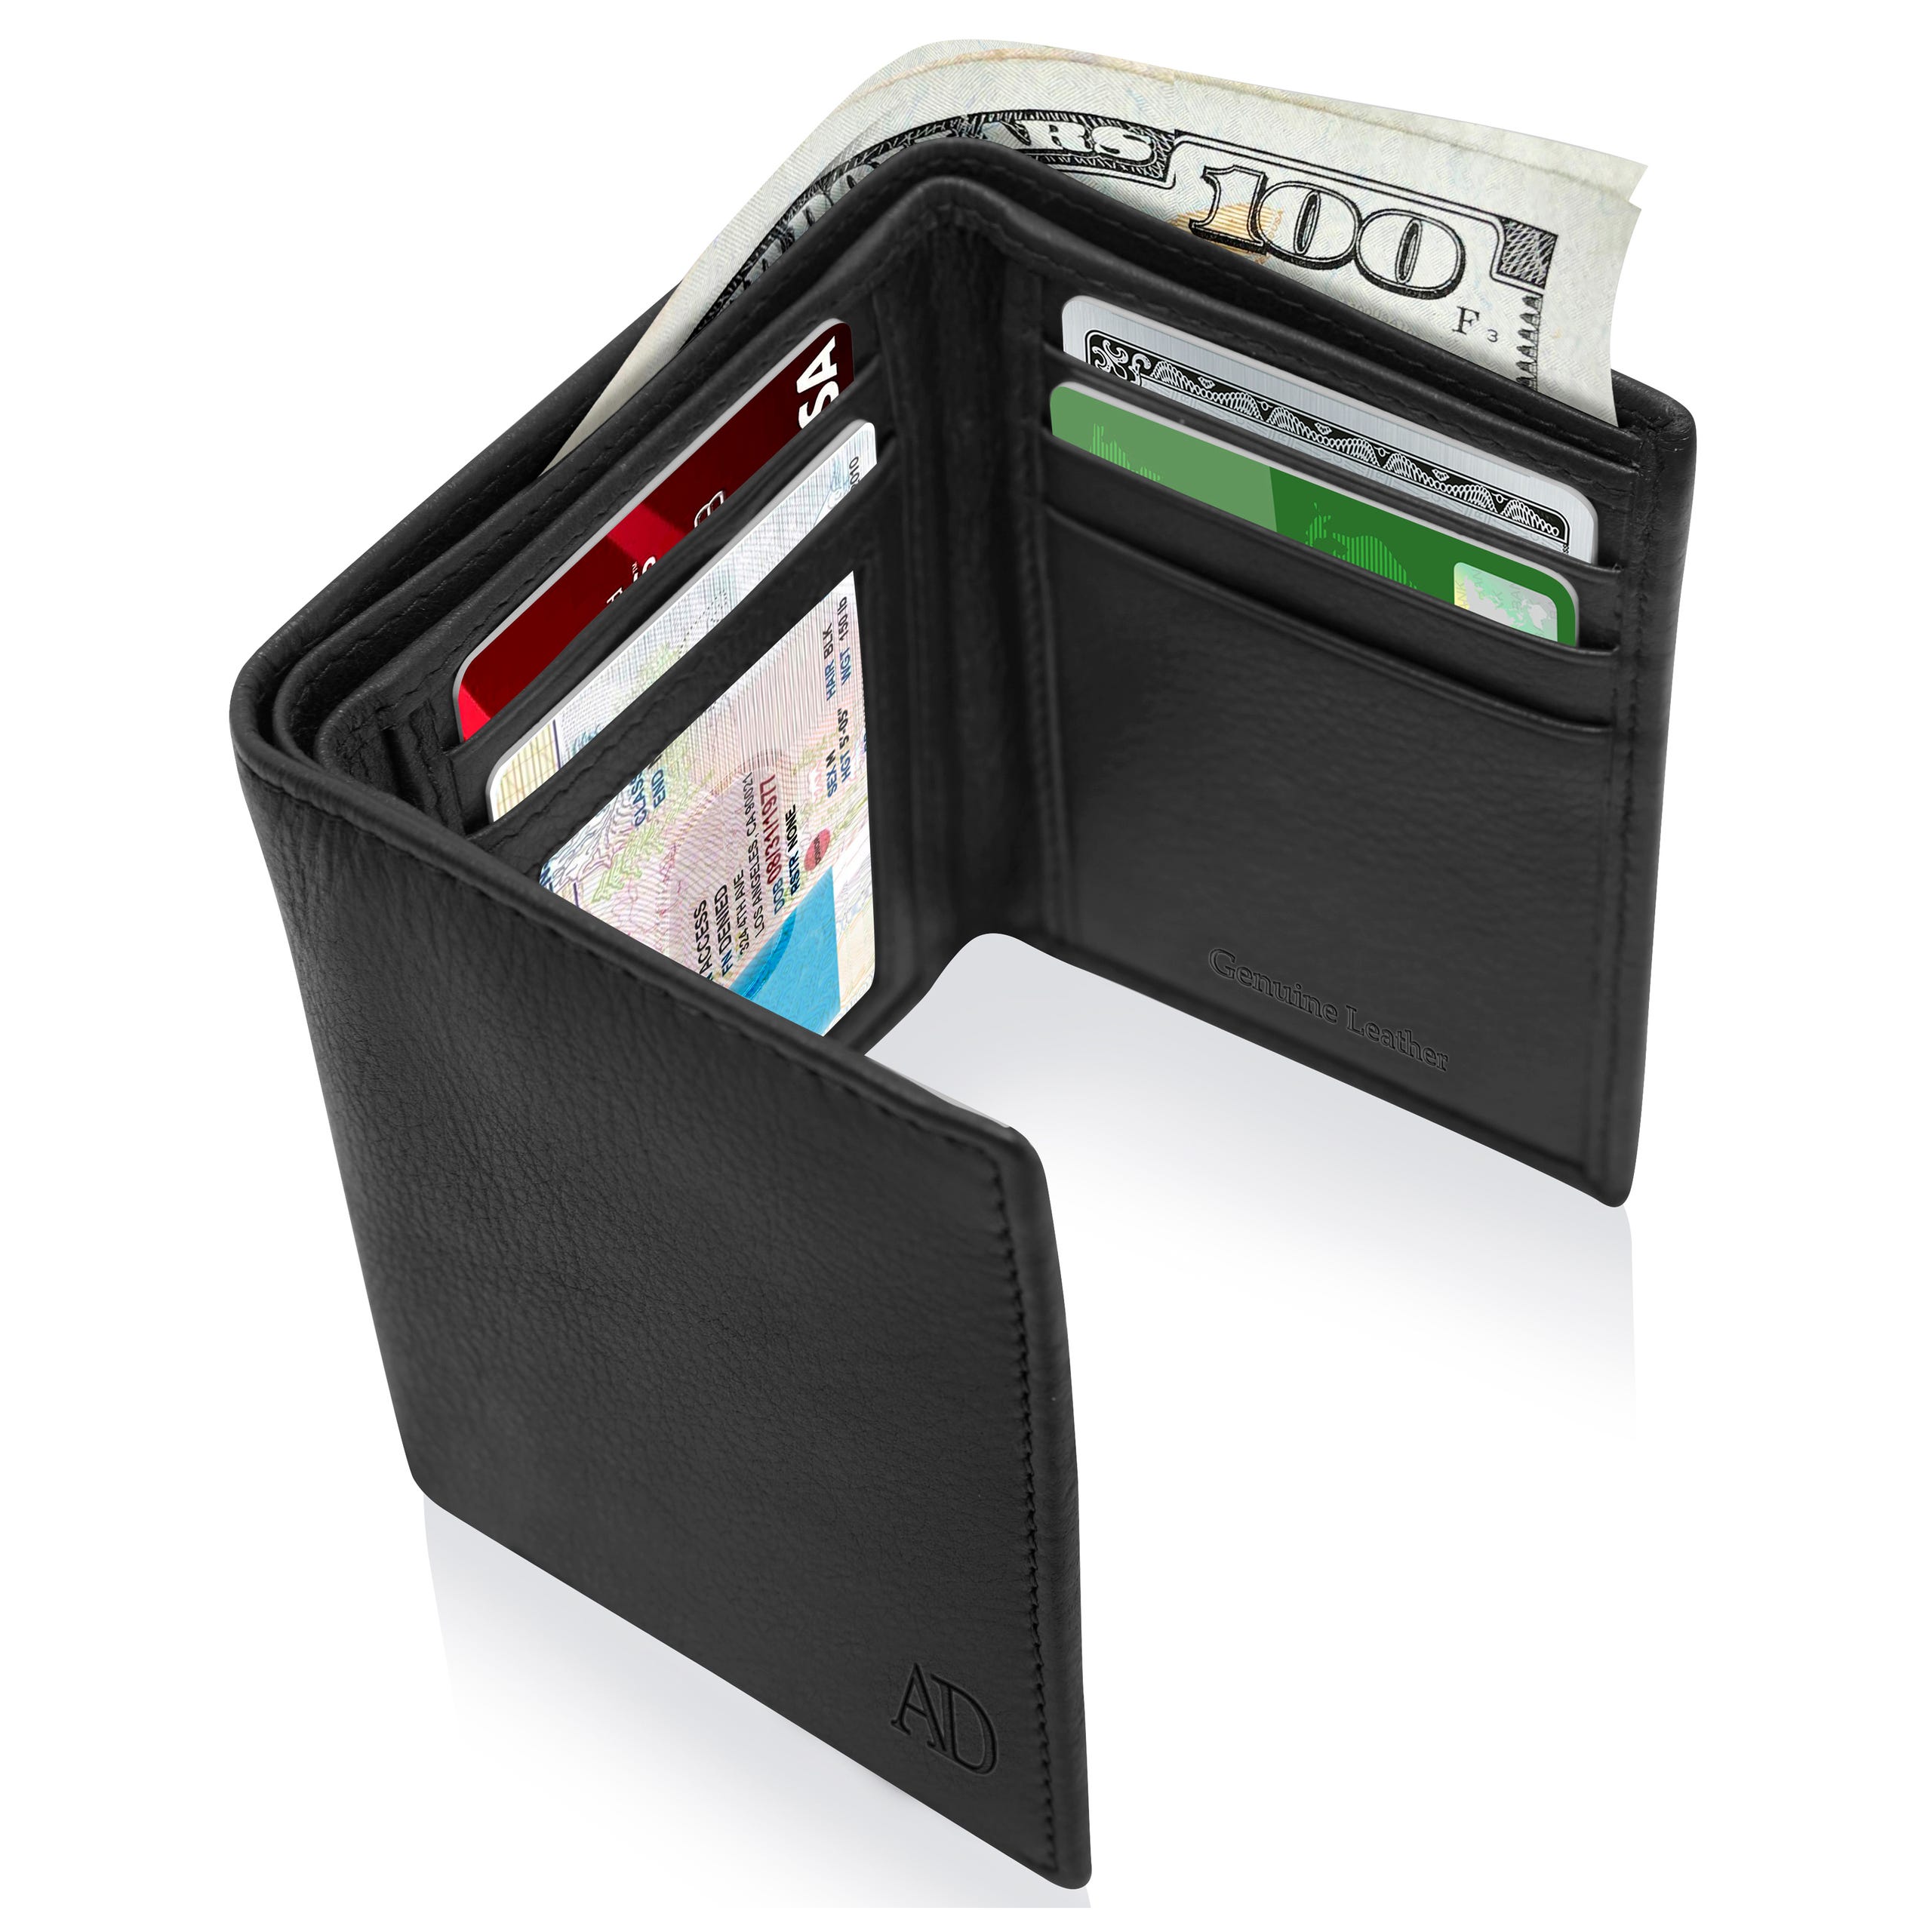 A black leather wallet open showing cash, credit cards, and an identification card.